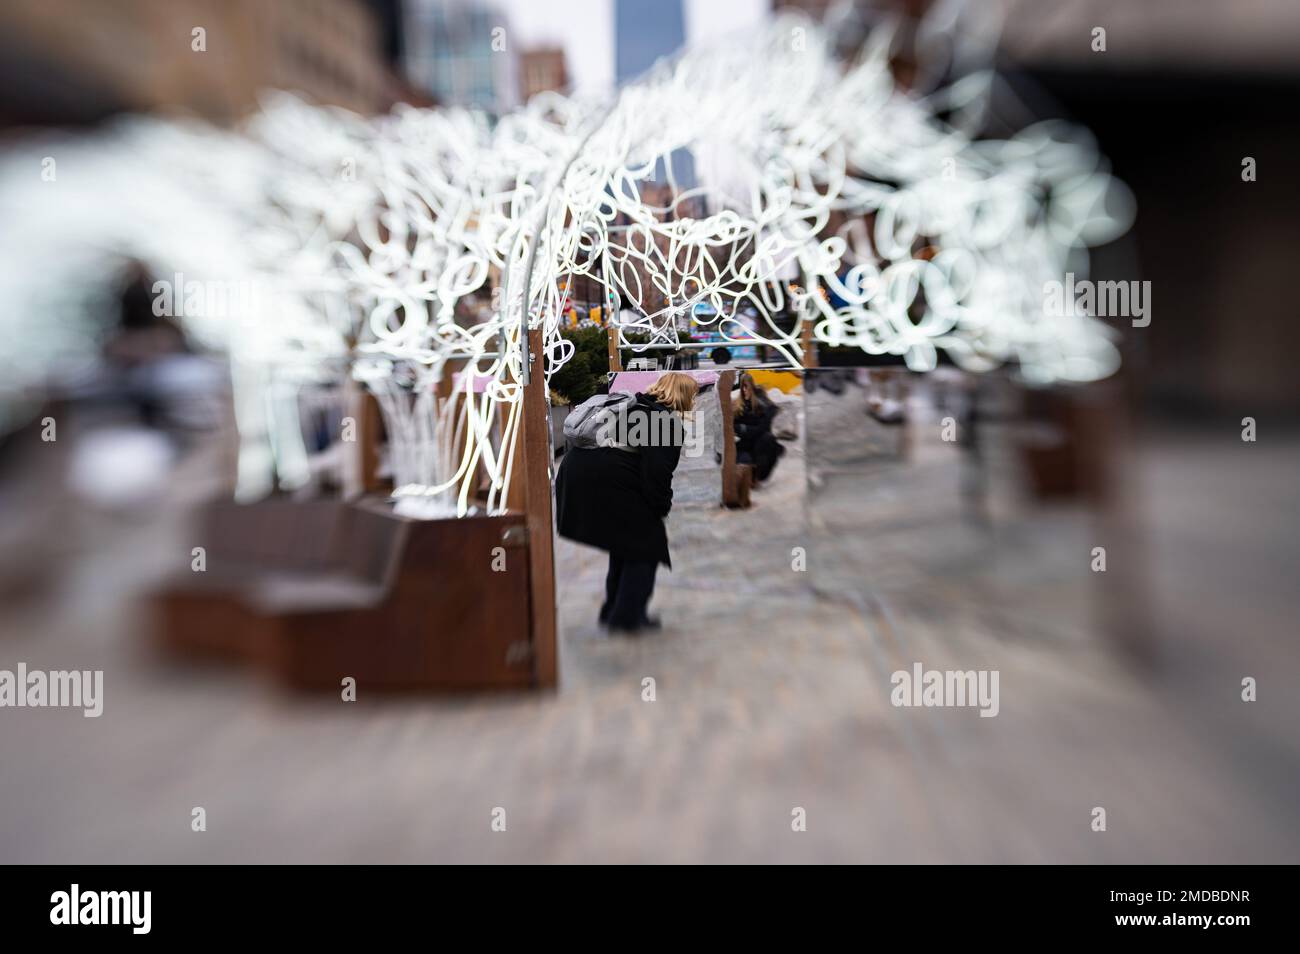 In a selective focus street photo, tourist De Calvert looks at herself in a mirrored section of a public art piece in the Meatpacking District. Stock Photo